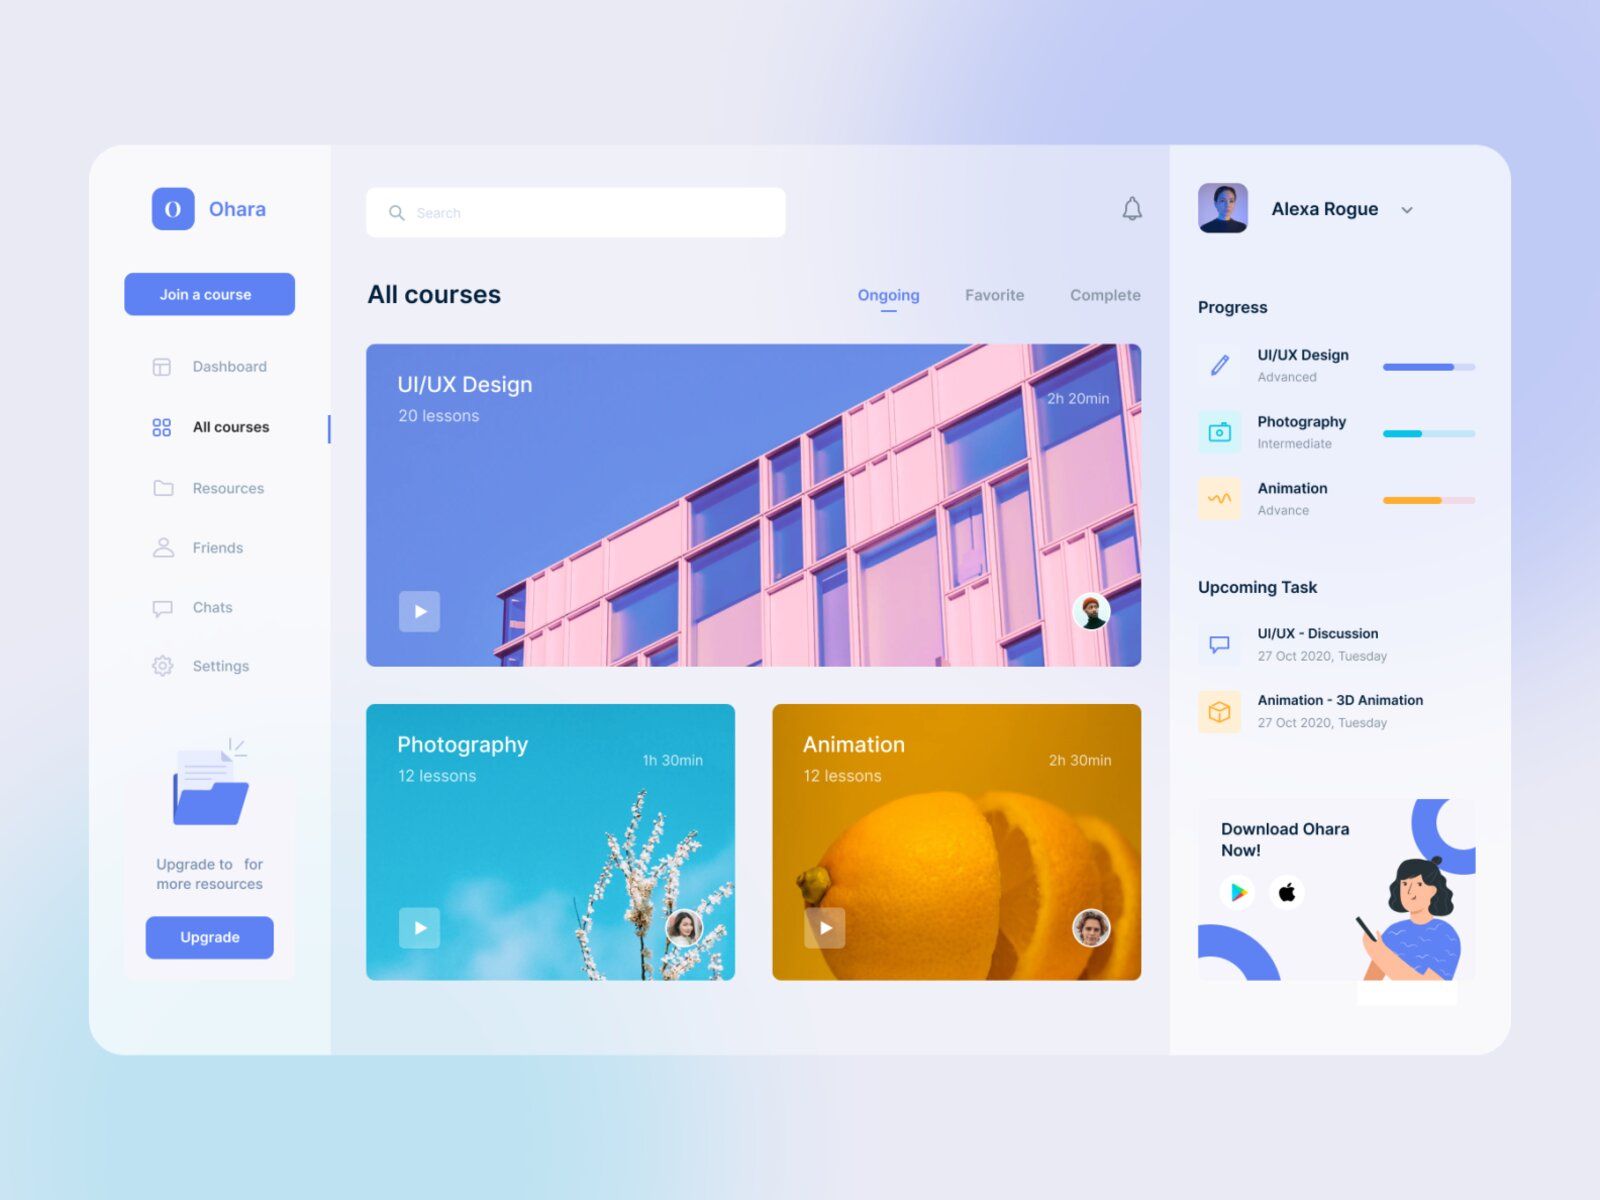 Course list with titles (*image by [Douglas Ramos](https://dribbble.com/dramos){ rel="nofollow" .default-md}*)